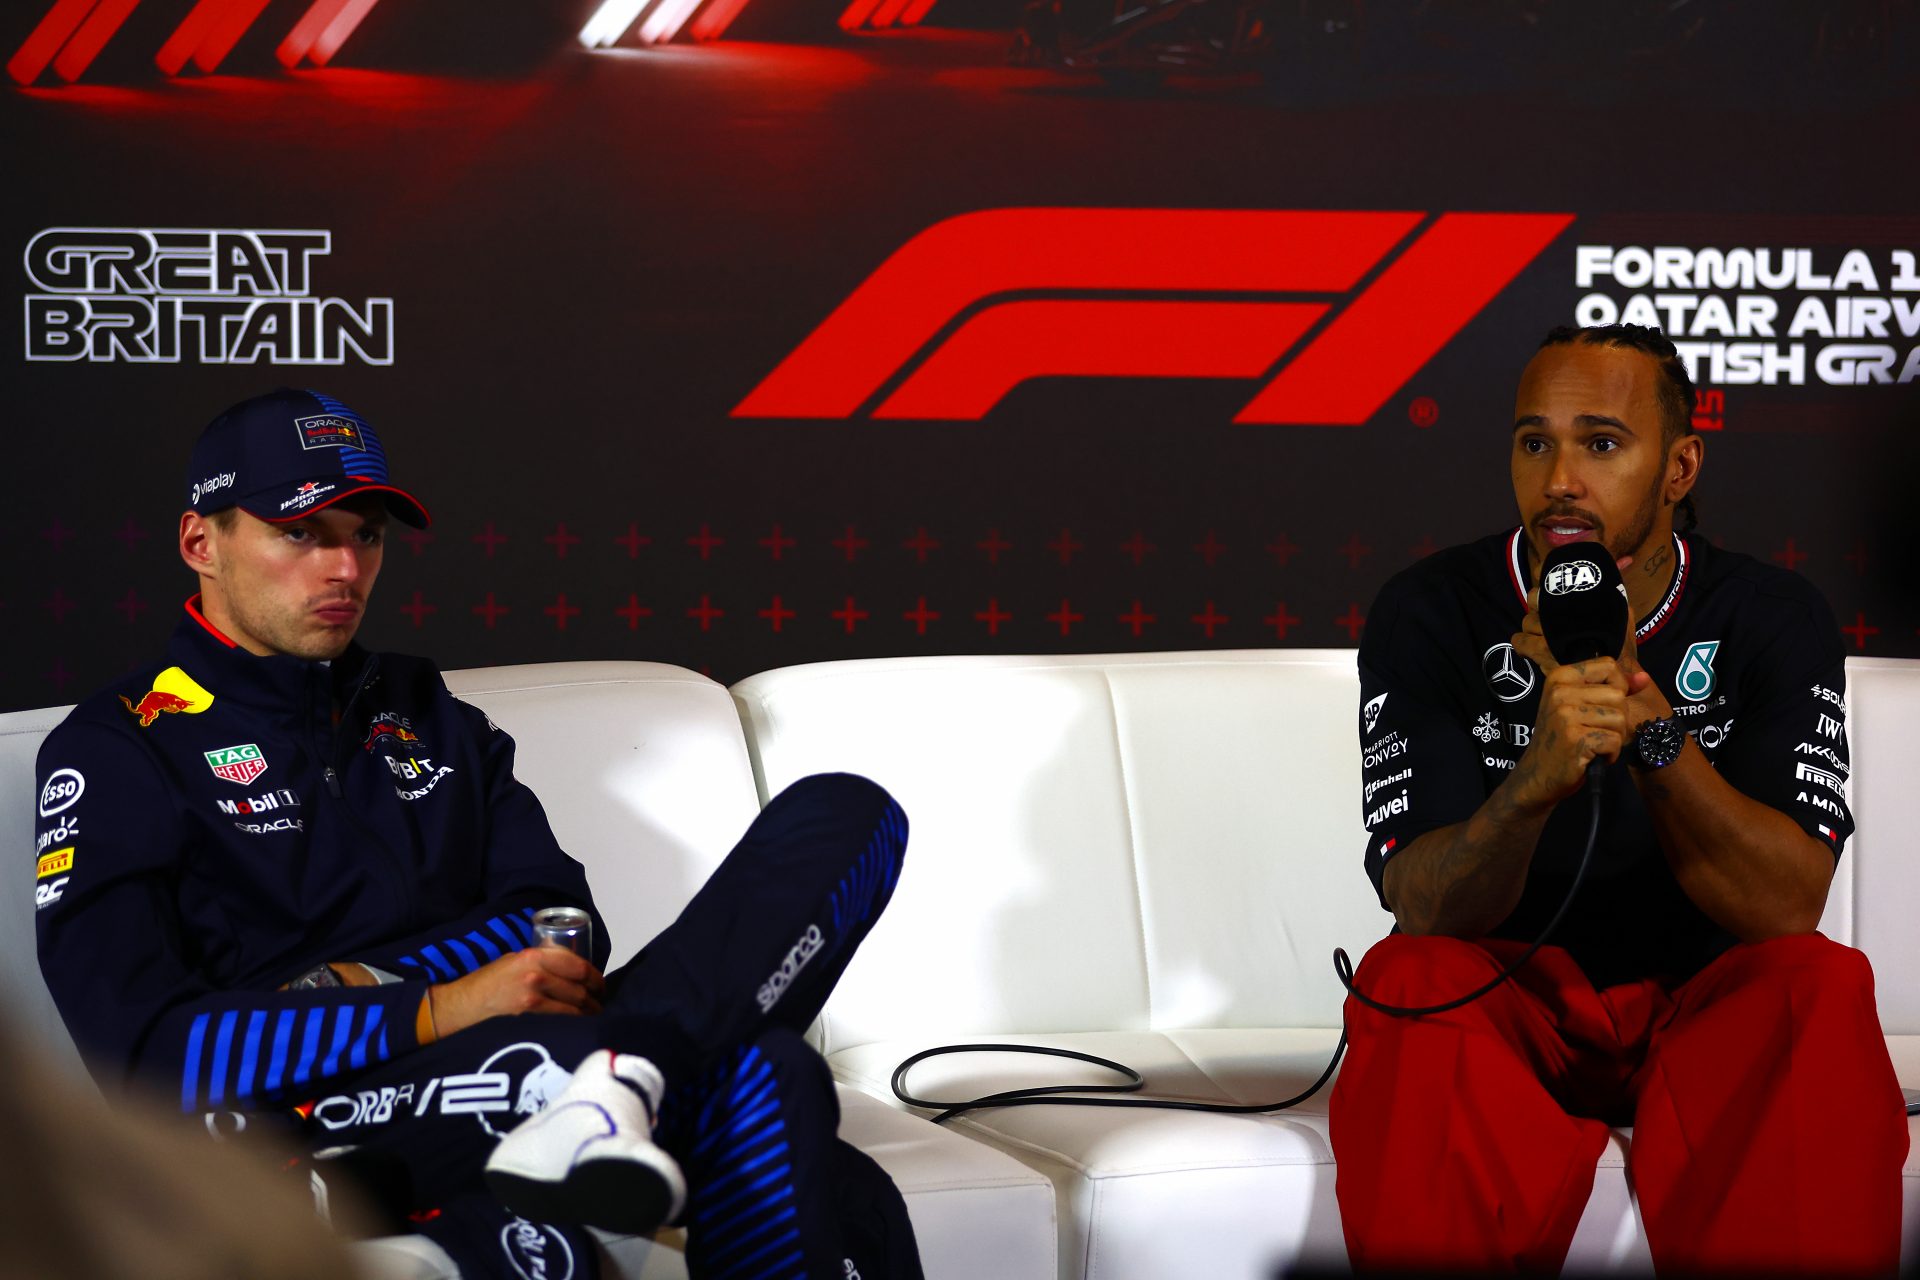 Lewis Hamilton calls for Verstappen to 'act like a world champion' after Hungarian GP outrage